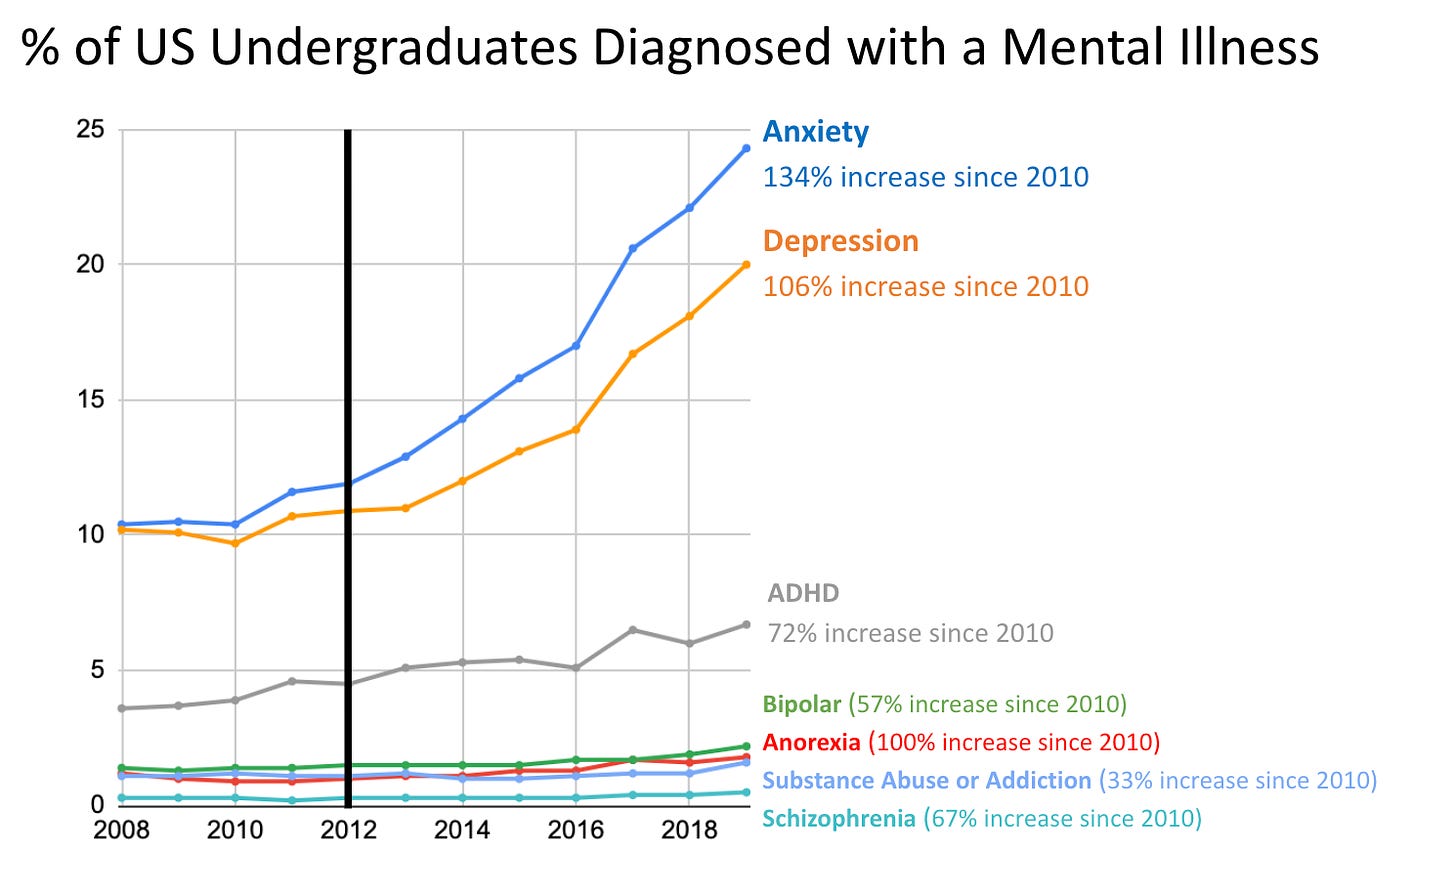 % of US Undergraduates diagnosed with a mental illness. There was a 134% increase in anxiety since 2010 and a 106% increase in depression since 2010.